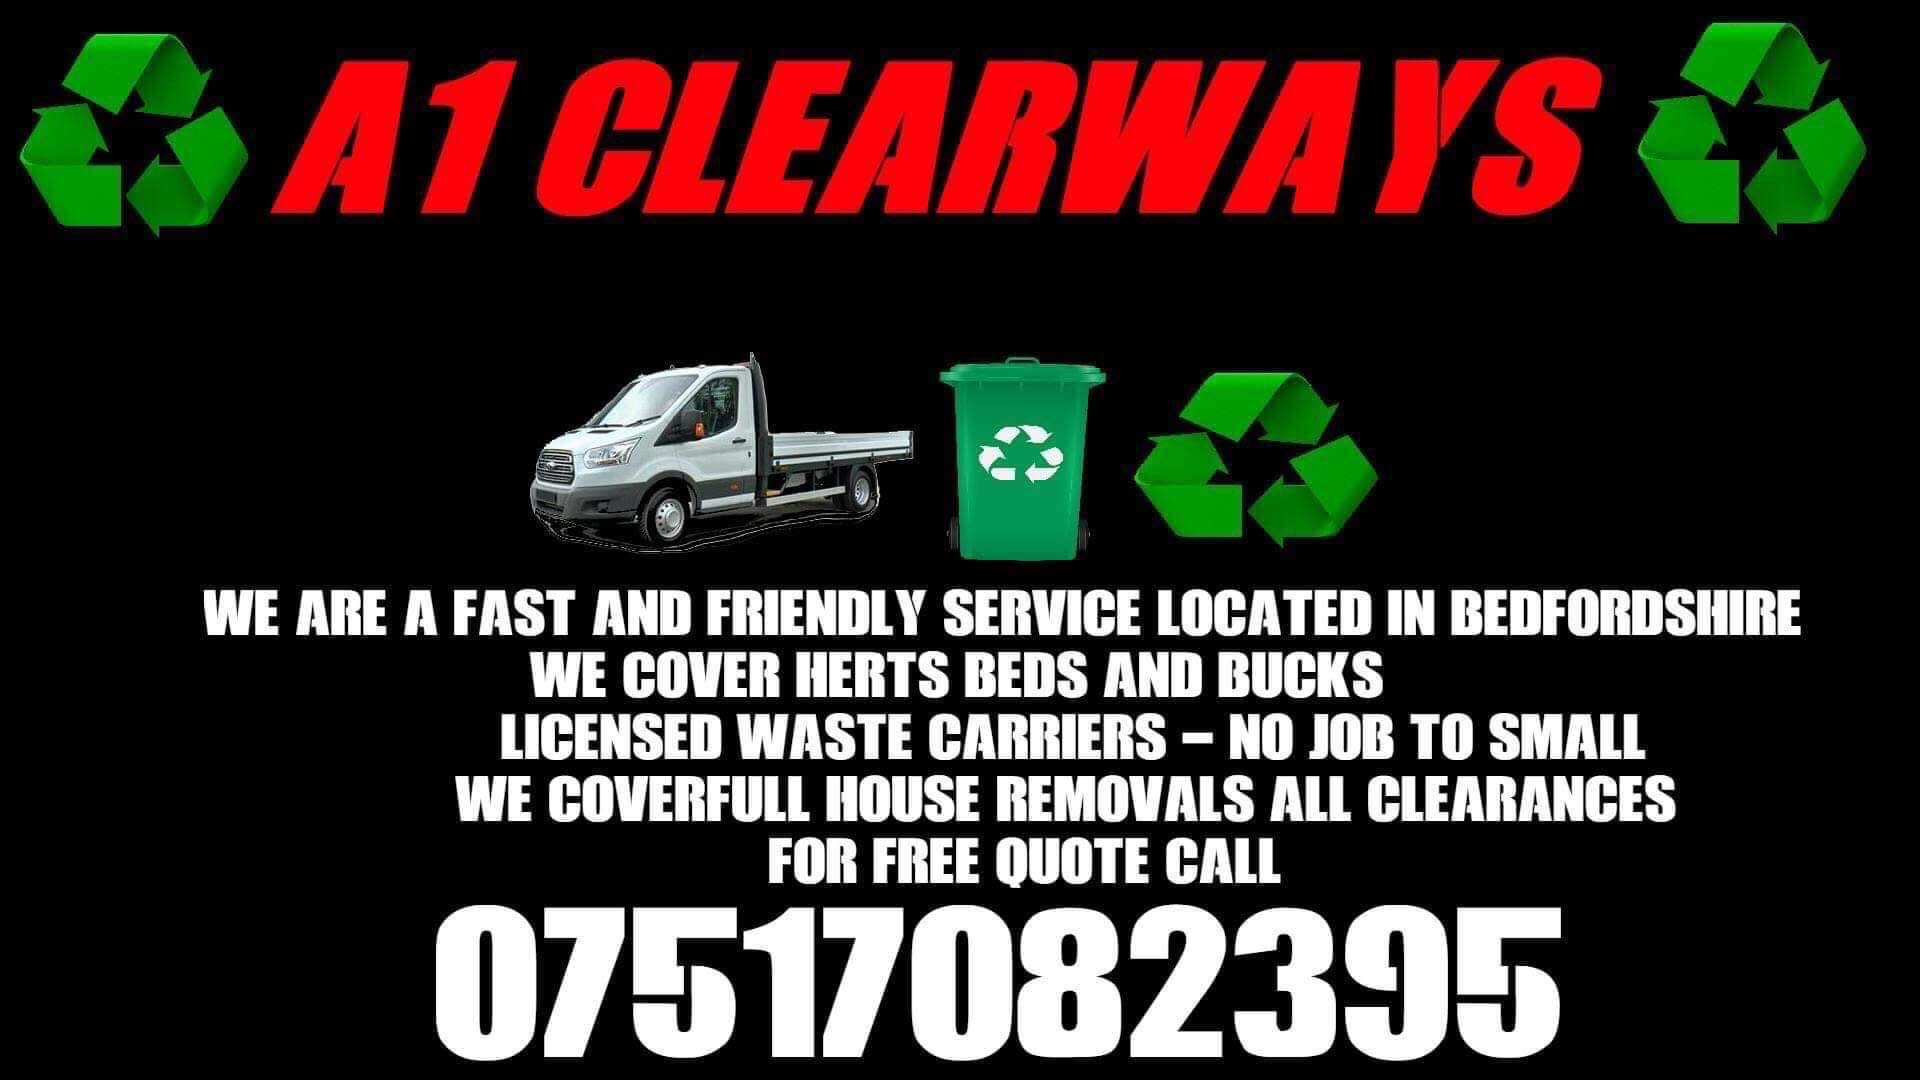 A1 Clearways